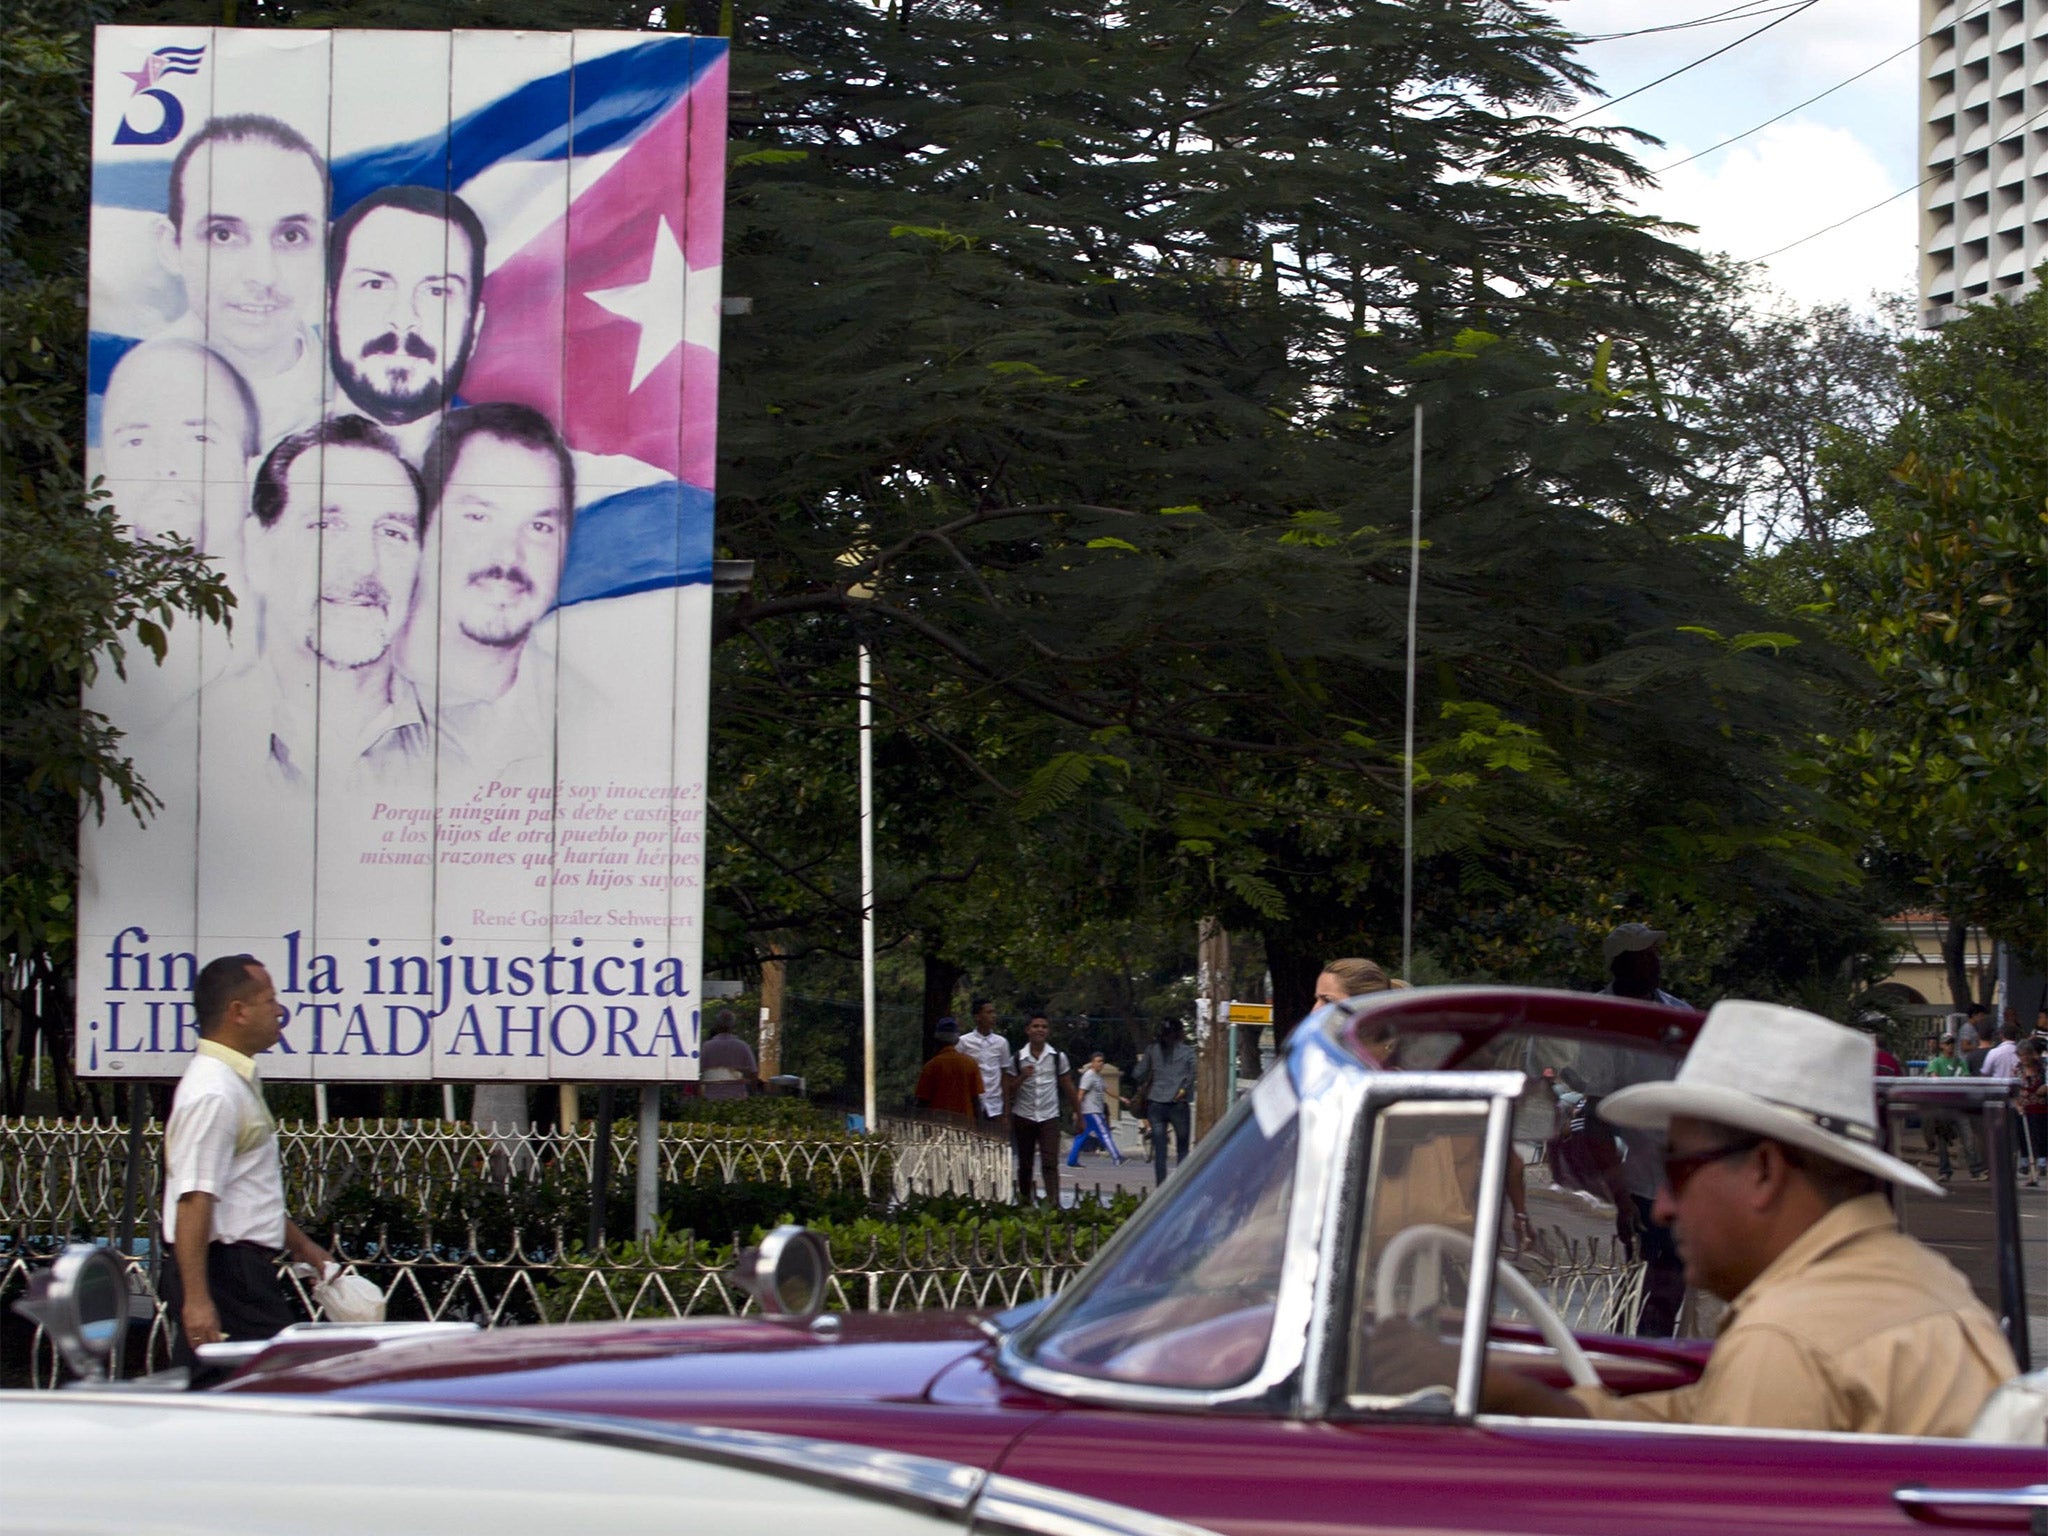 Tourists riding in a classic American car drive by a billboard showing 'The Cuban Five' that reads in Spanish 'End the injustice. Freedom now,' in Havana, Cuba